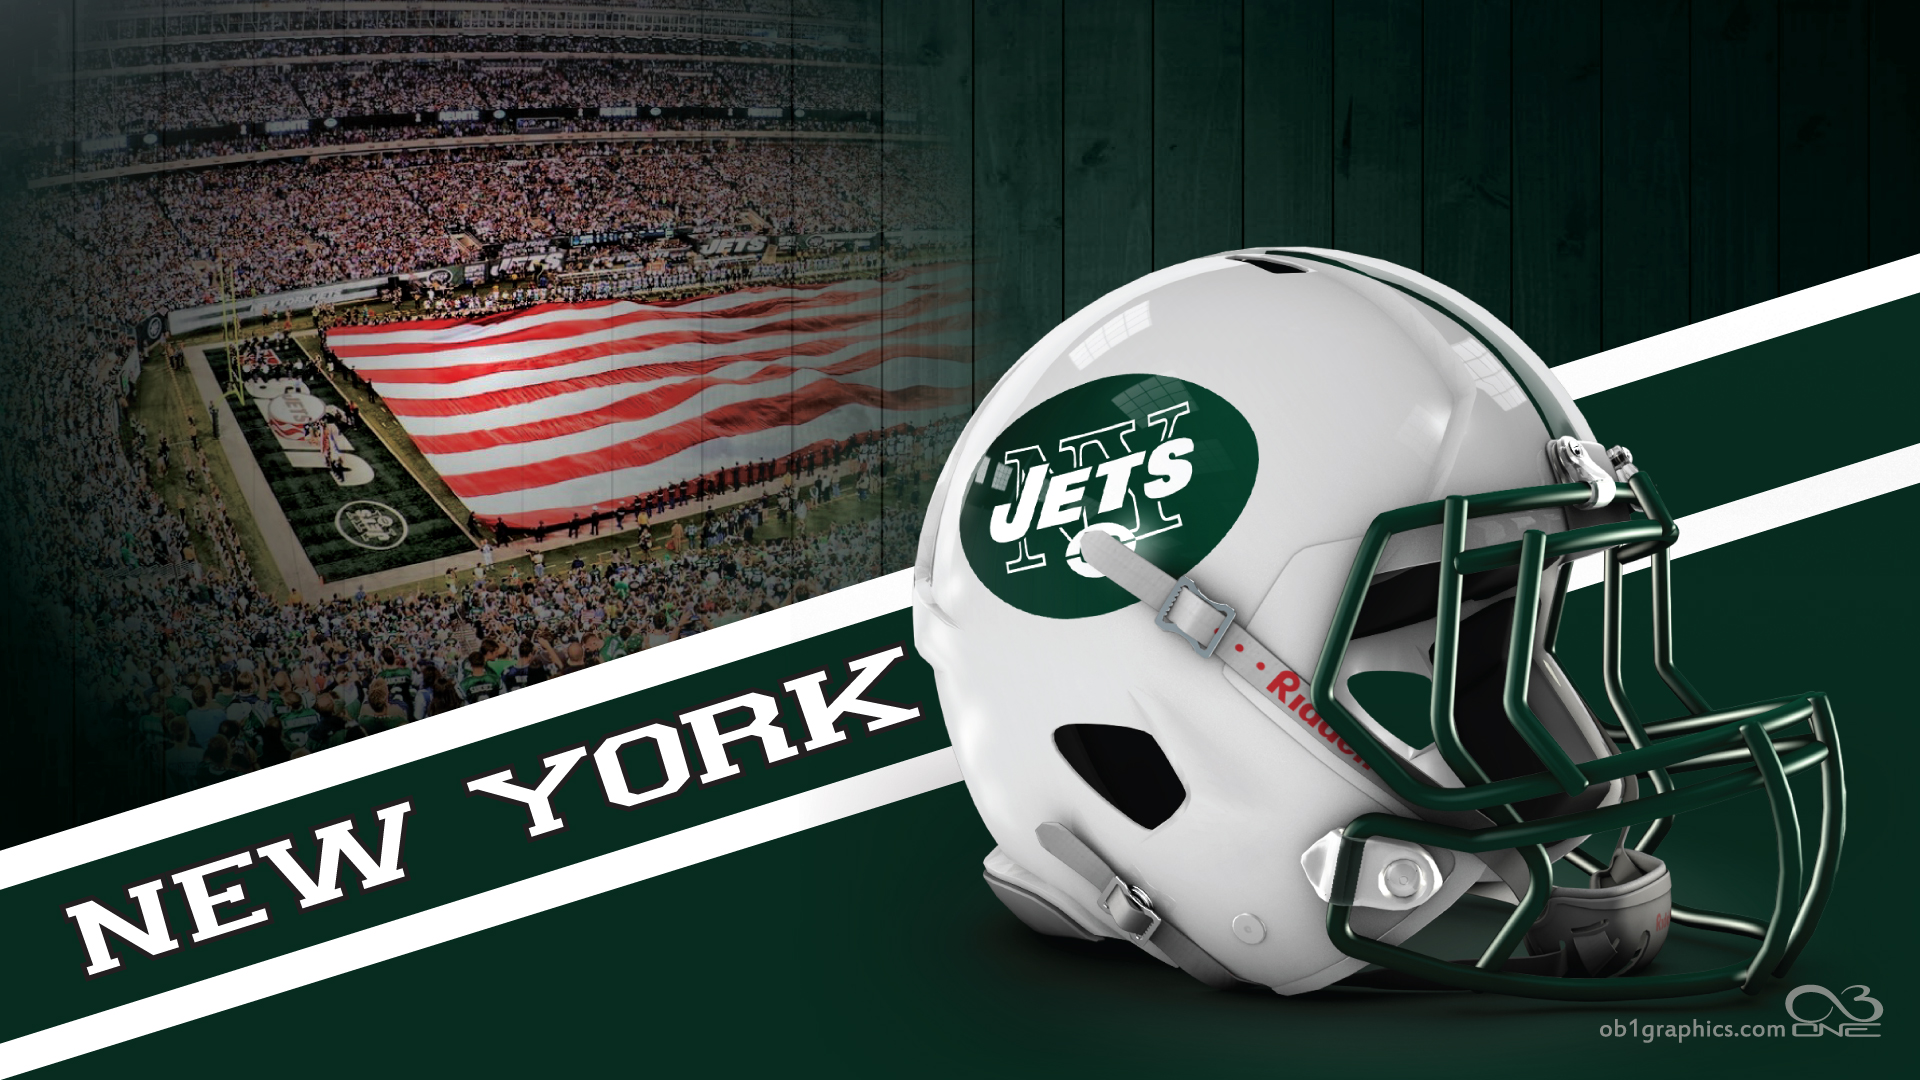 New York Jets iPhone wallpaper  Click Here for more NY Jets  Flickr